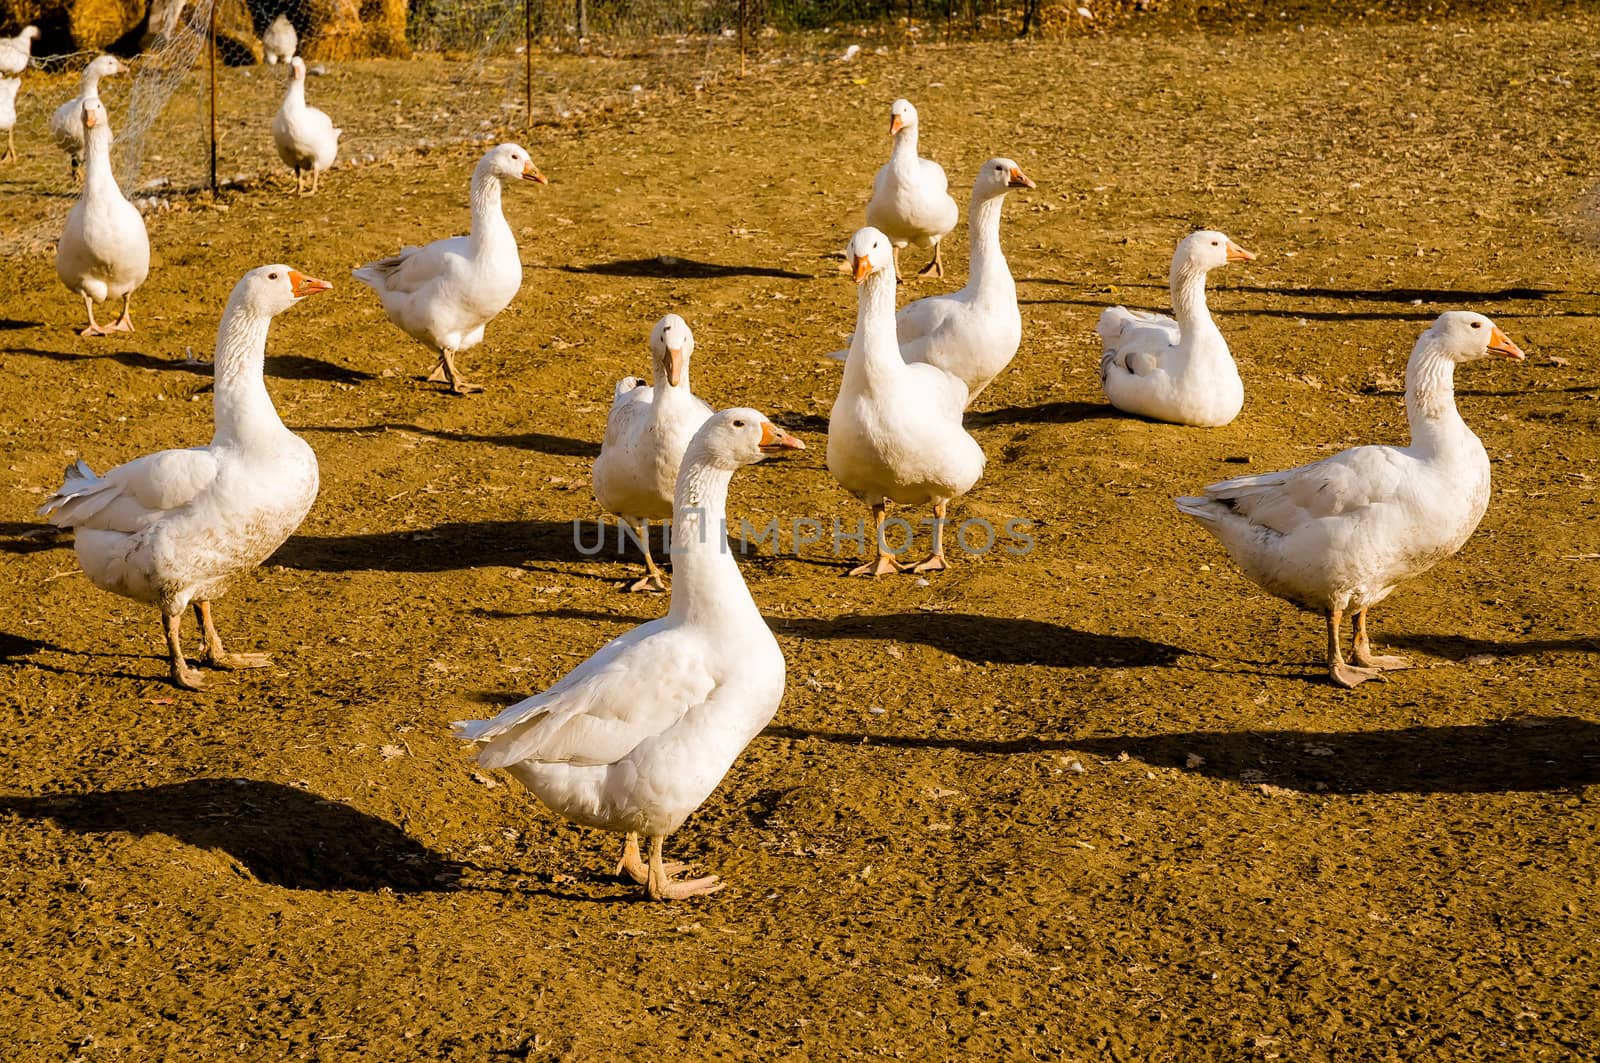 A group of funny Italian geese in the barnyard